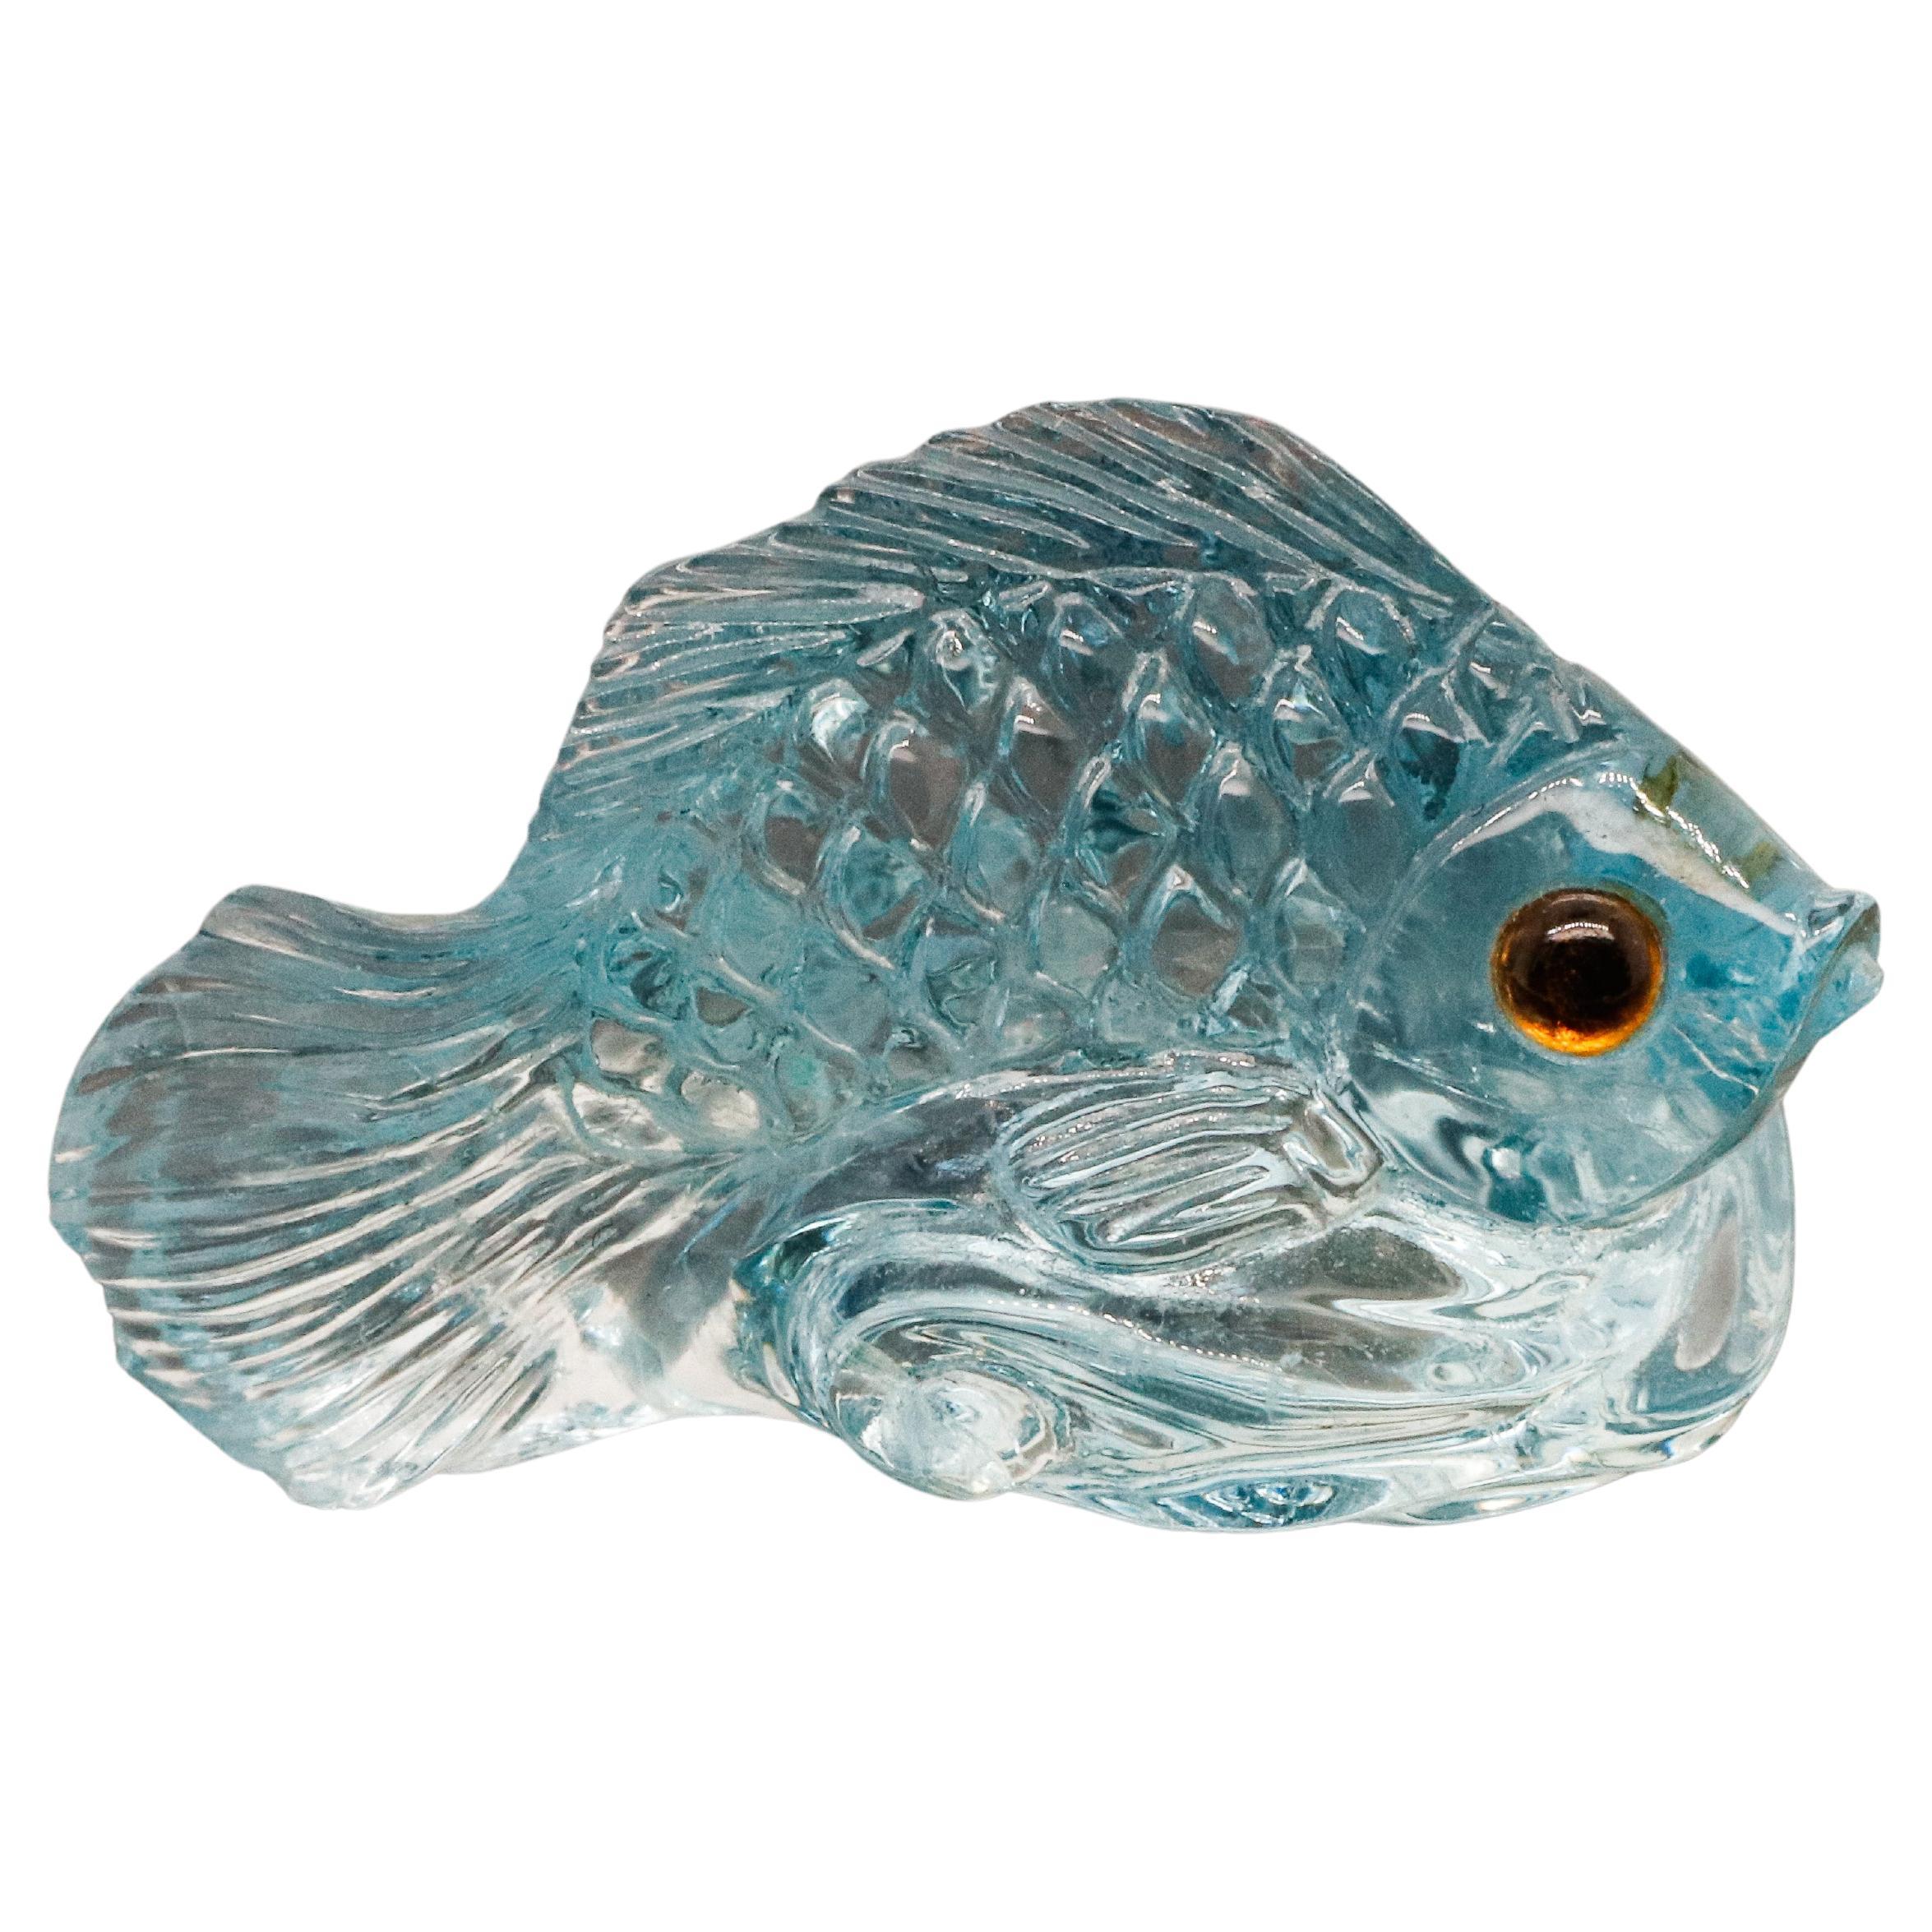 19.08 Ct Aquamarine Carved Fish Carving For Sale